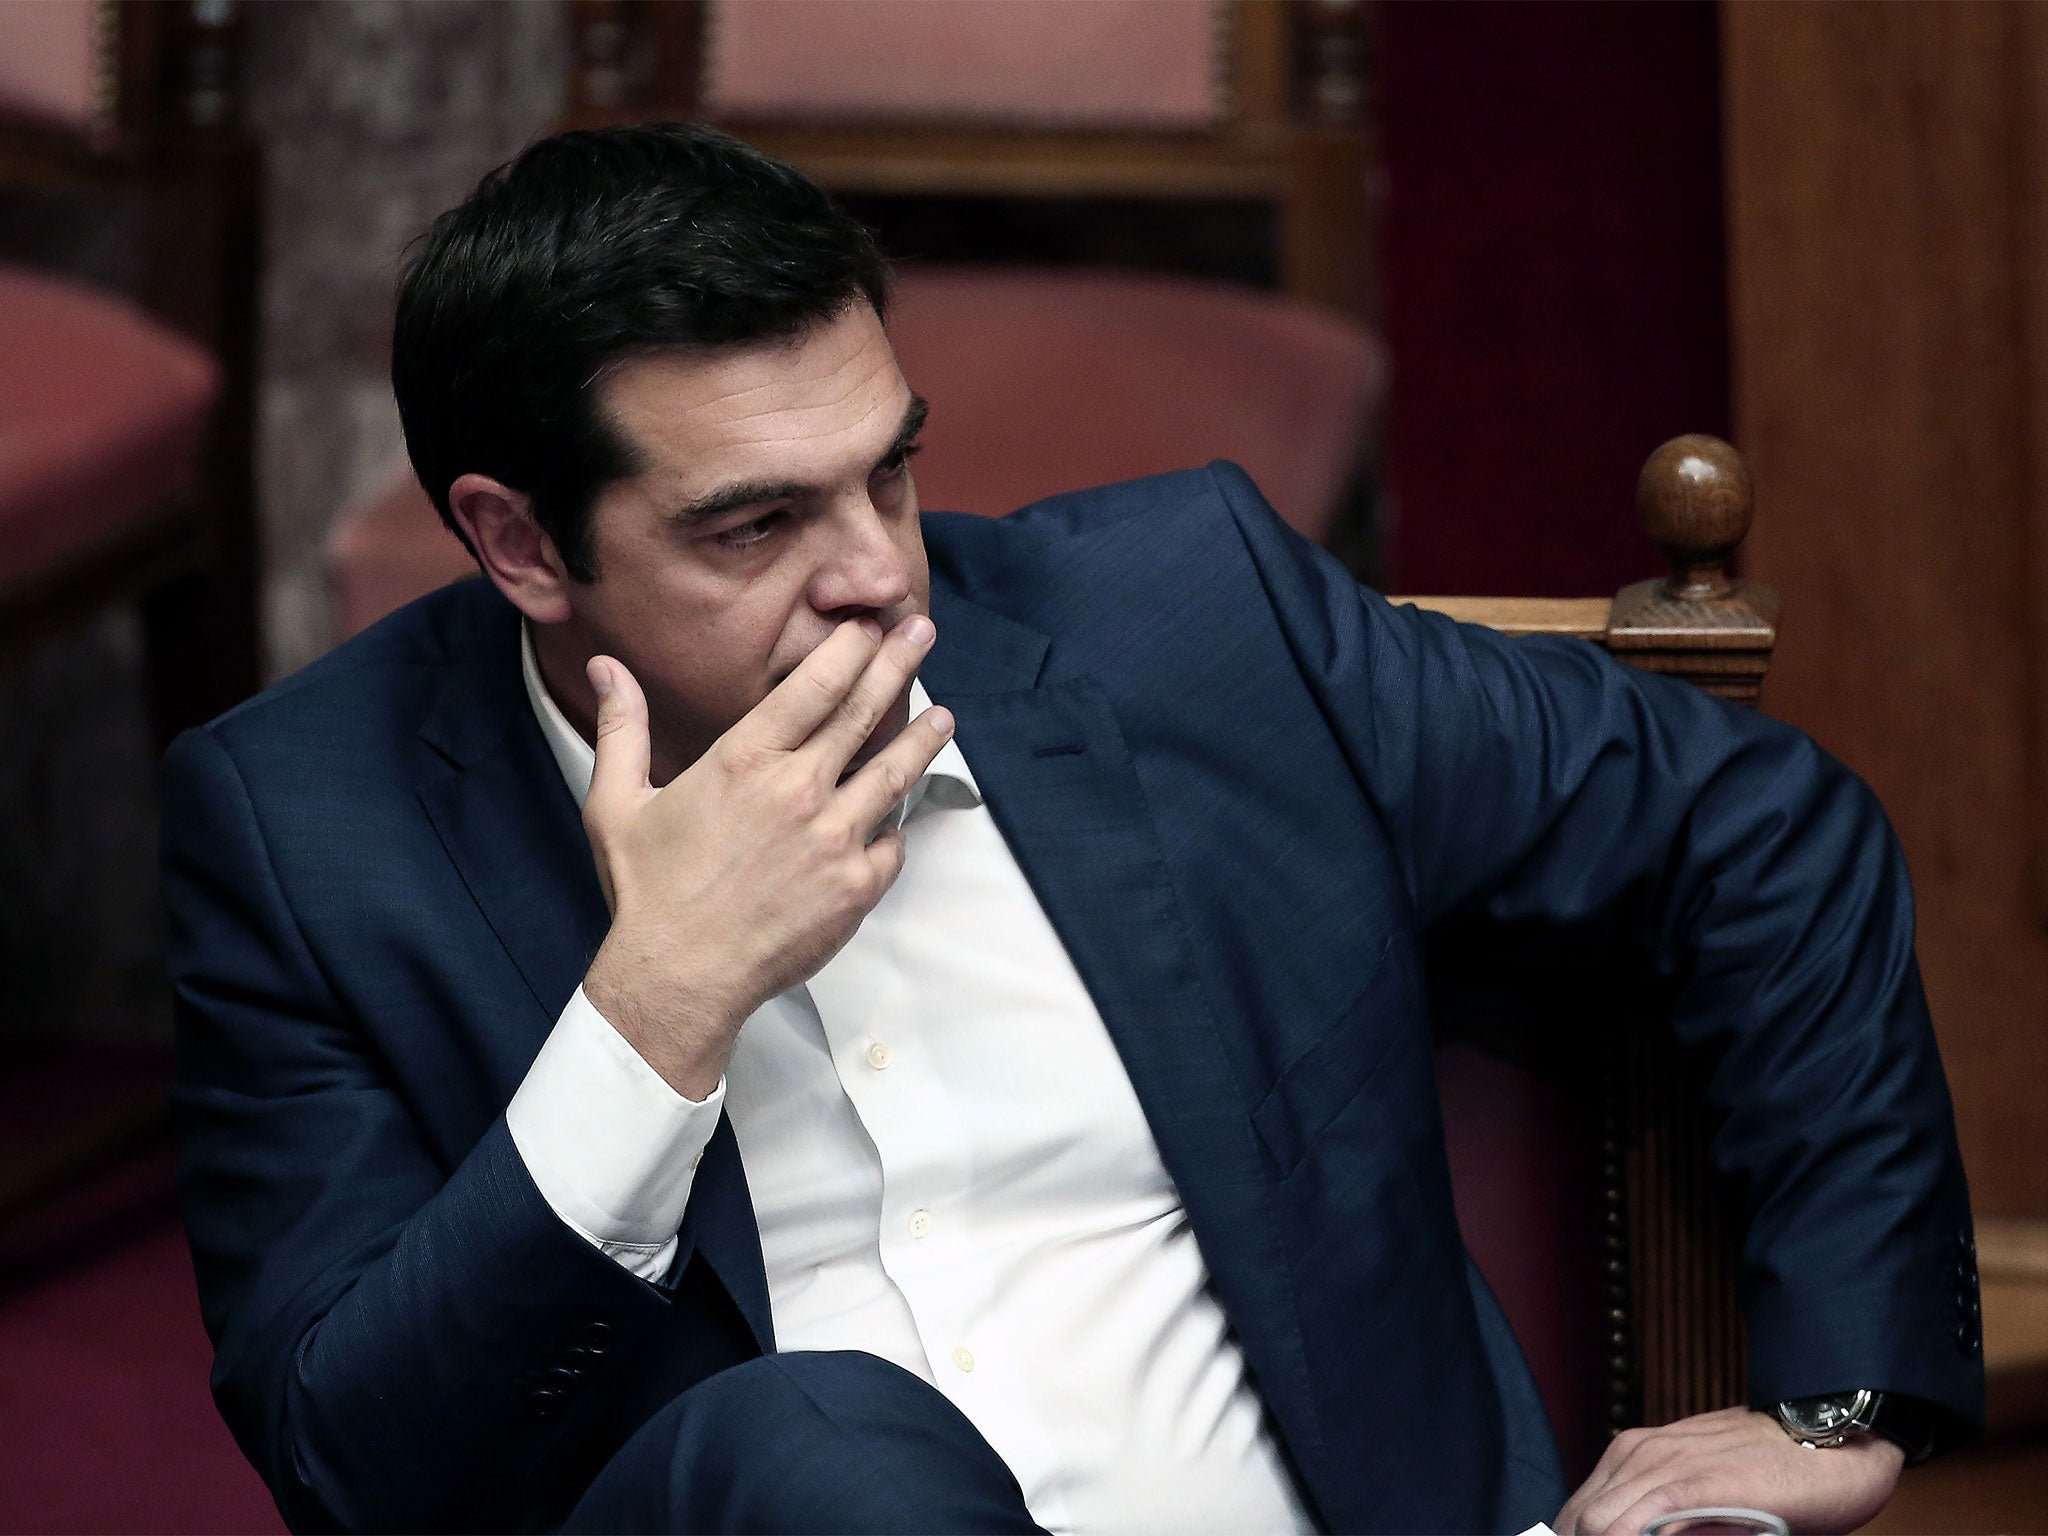 Tsipras said he was “unpleasantly surprised” by the proposal